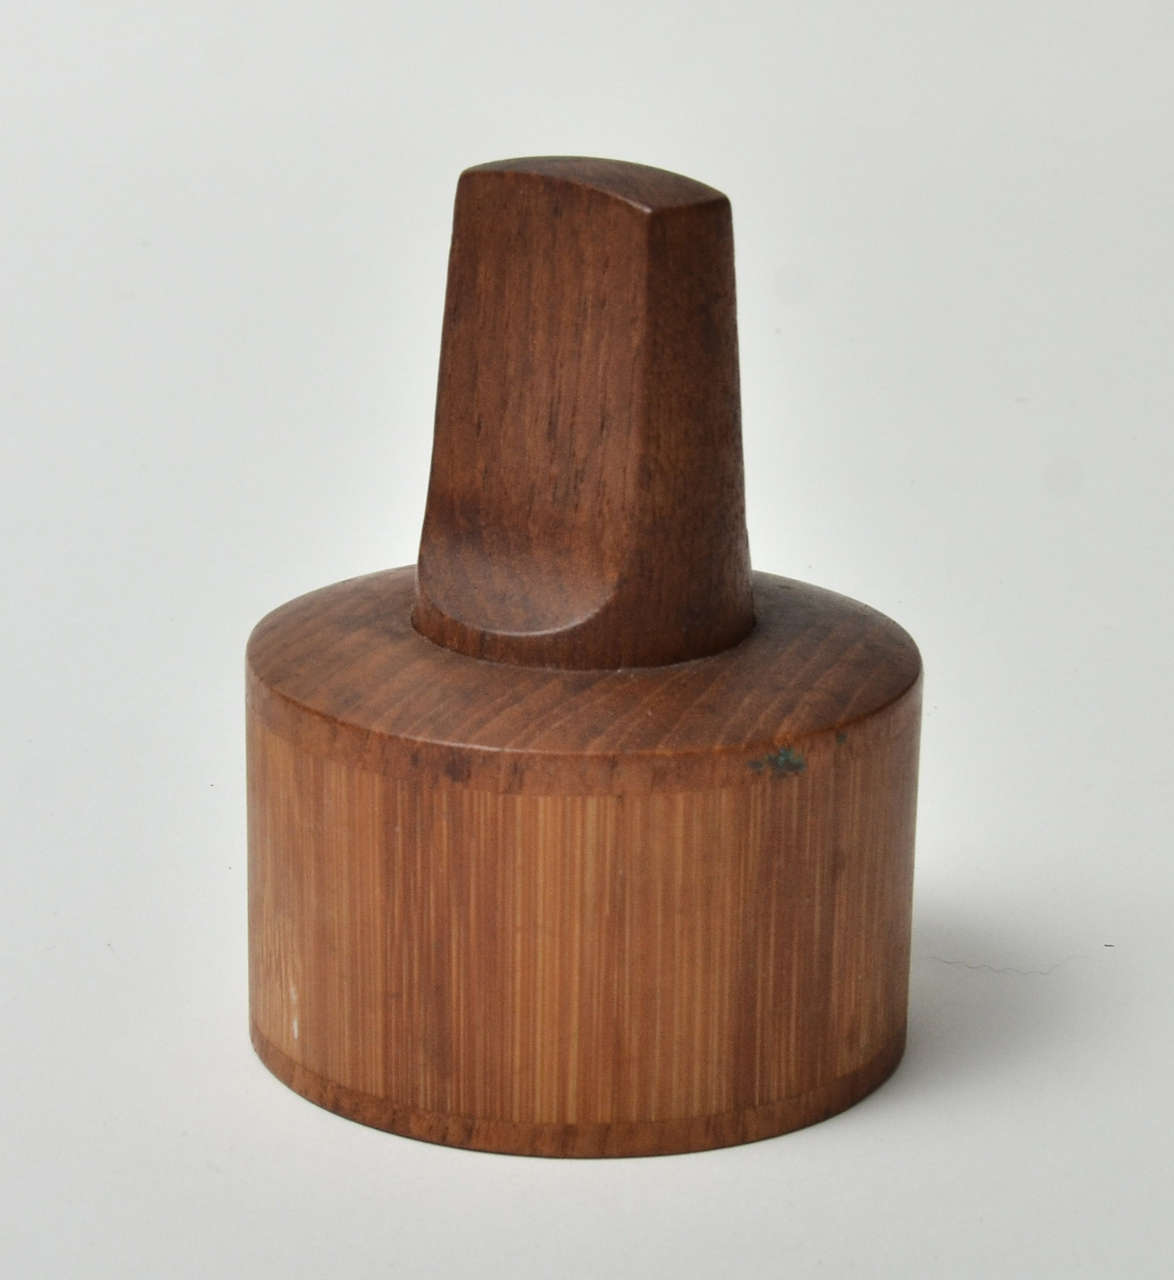 Bamboo & Teak Pepper Mill from Jens Quistgaard's Rare Wood Series, circa 1960.  Made in Denmark and using Peugeot Lion Steel Grinder.  Cylindrical teak base with bamboo 